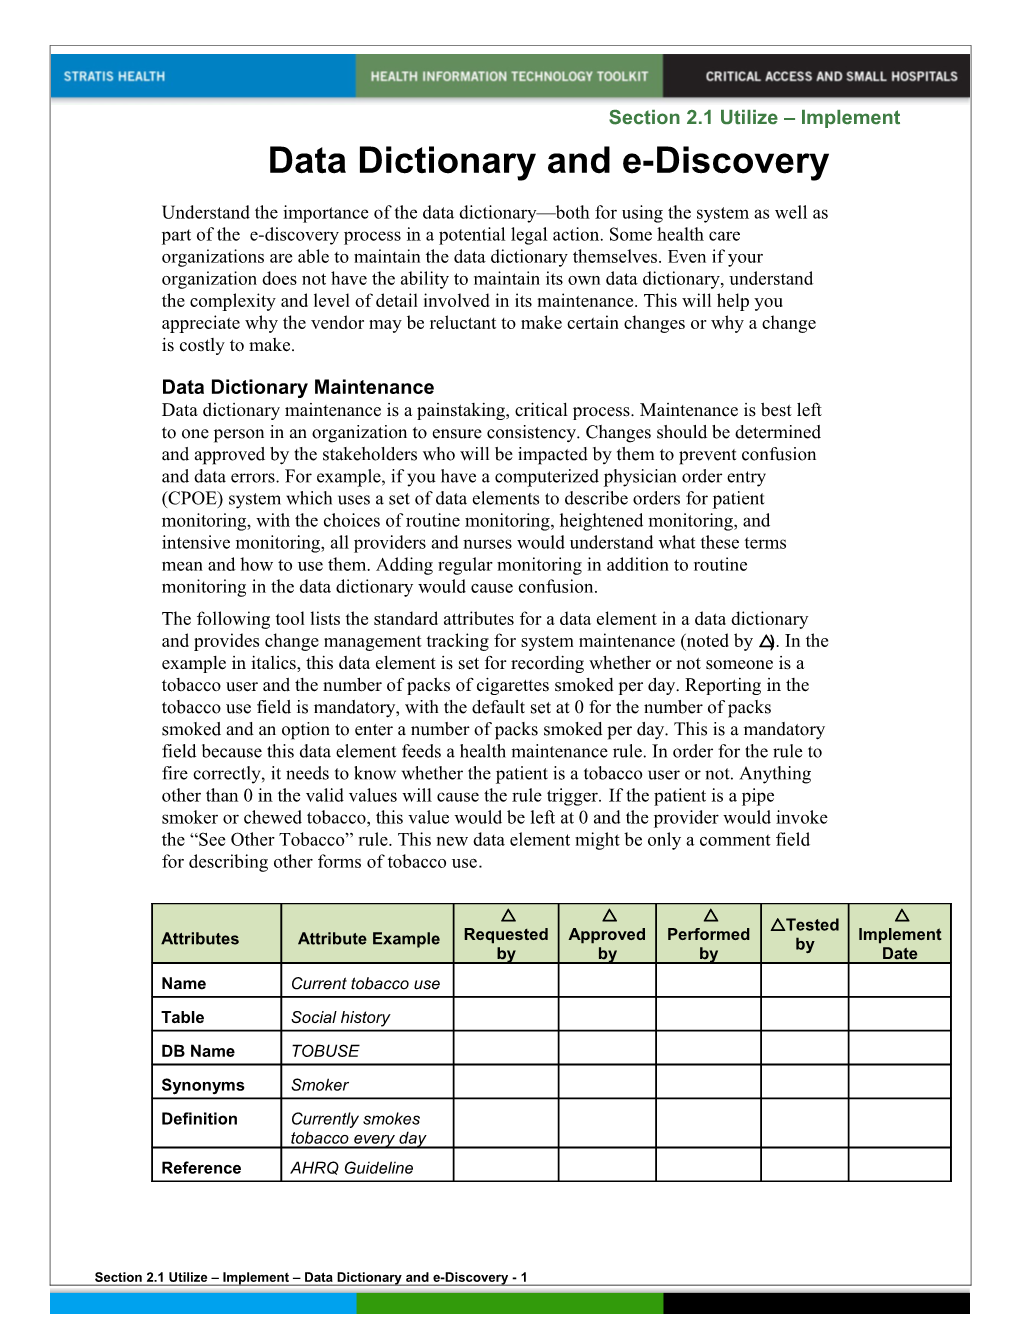 Data Dictionary and E-Discovery